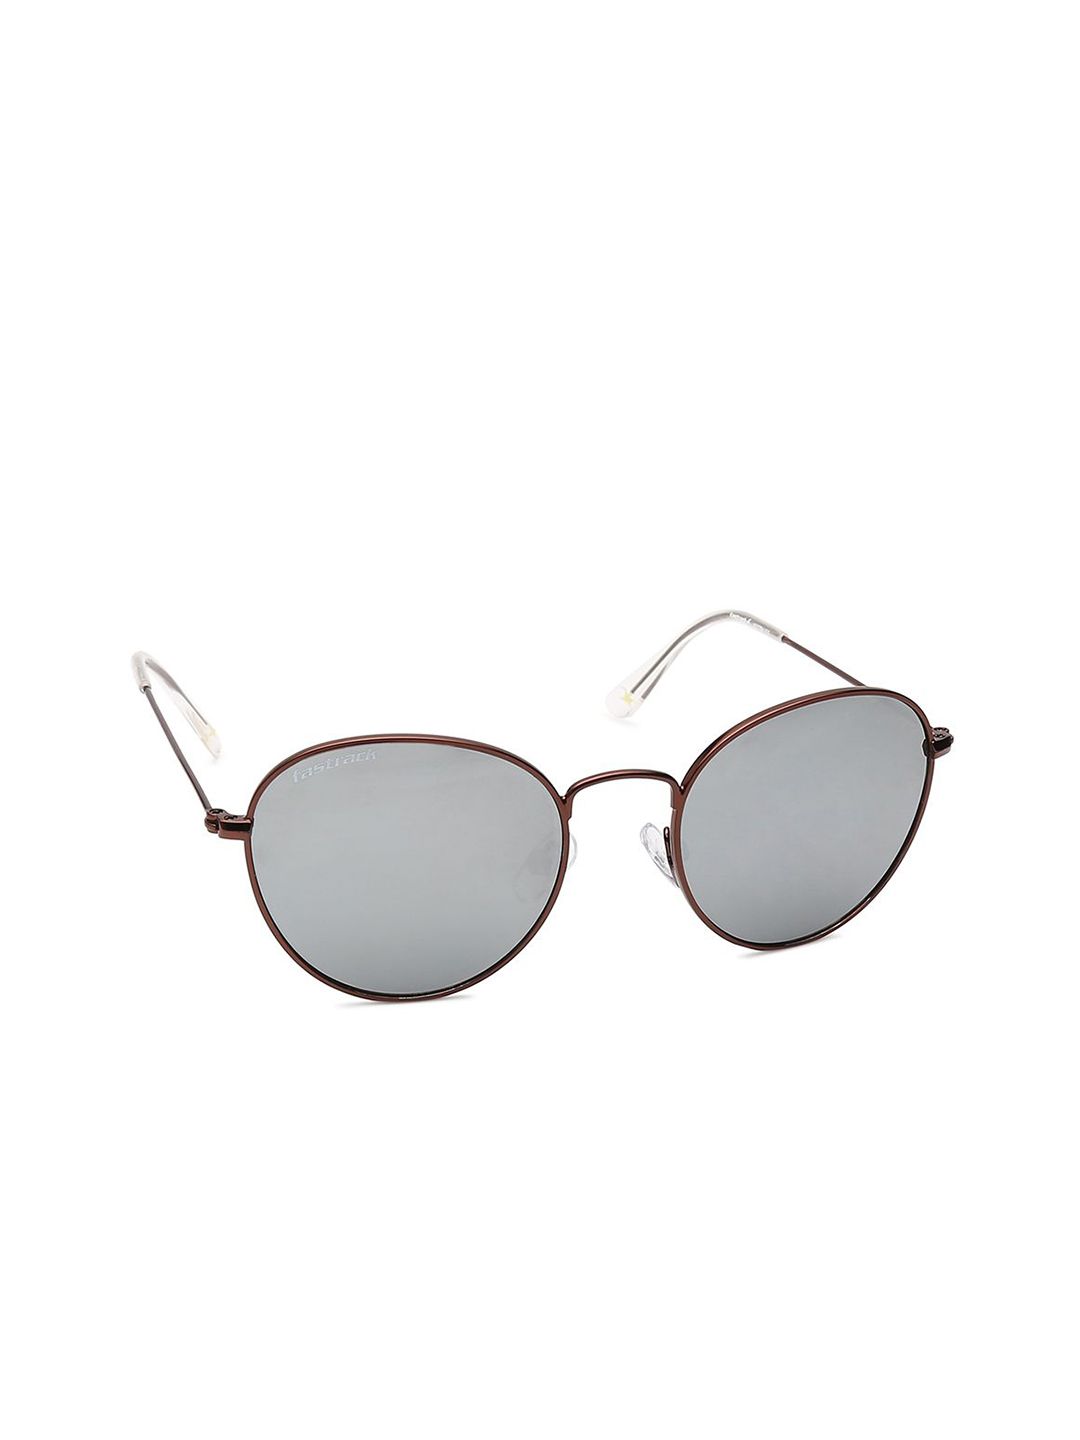 Fastrack Unisex Grey Lens & Brown Round Sunglasses with UV Protected Lens Price in India